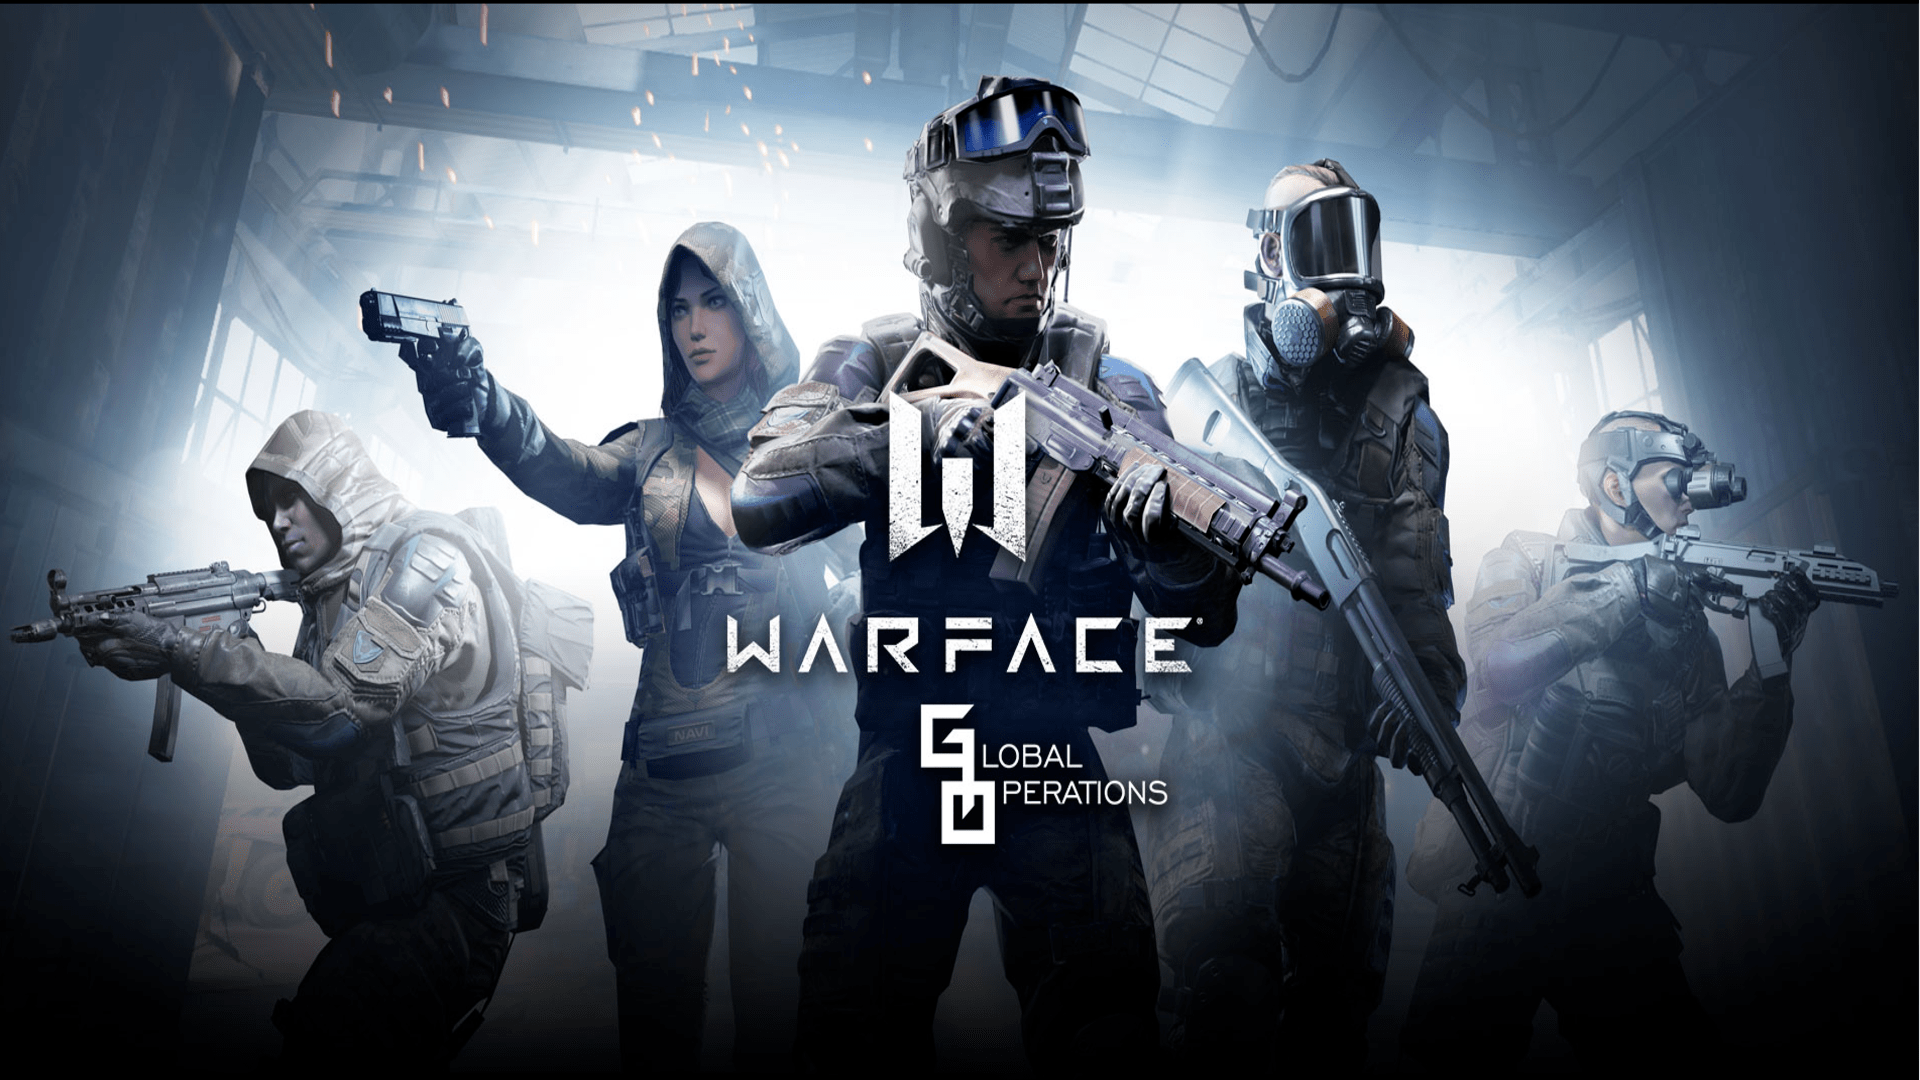 Warface Game Poster 2020 Wallpapers